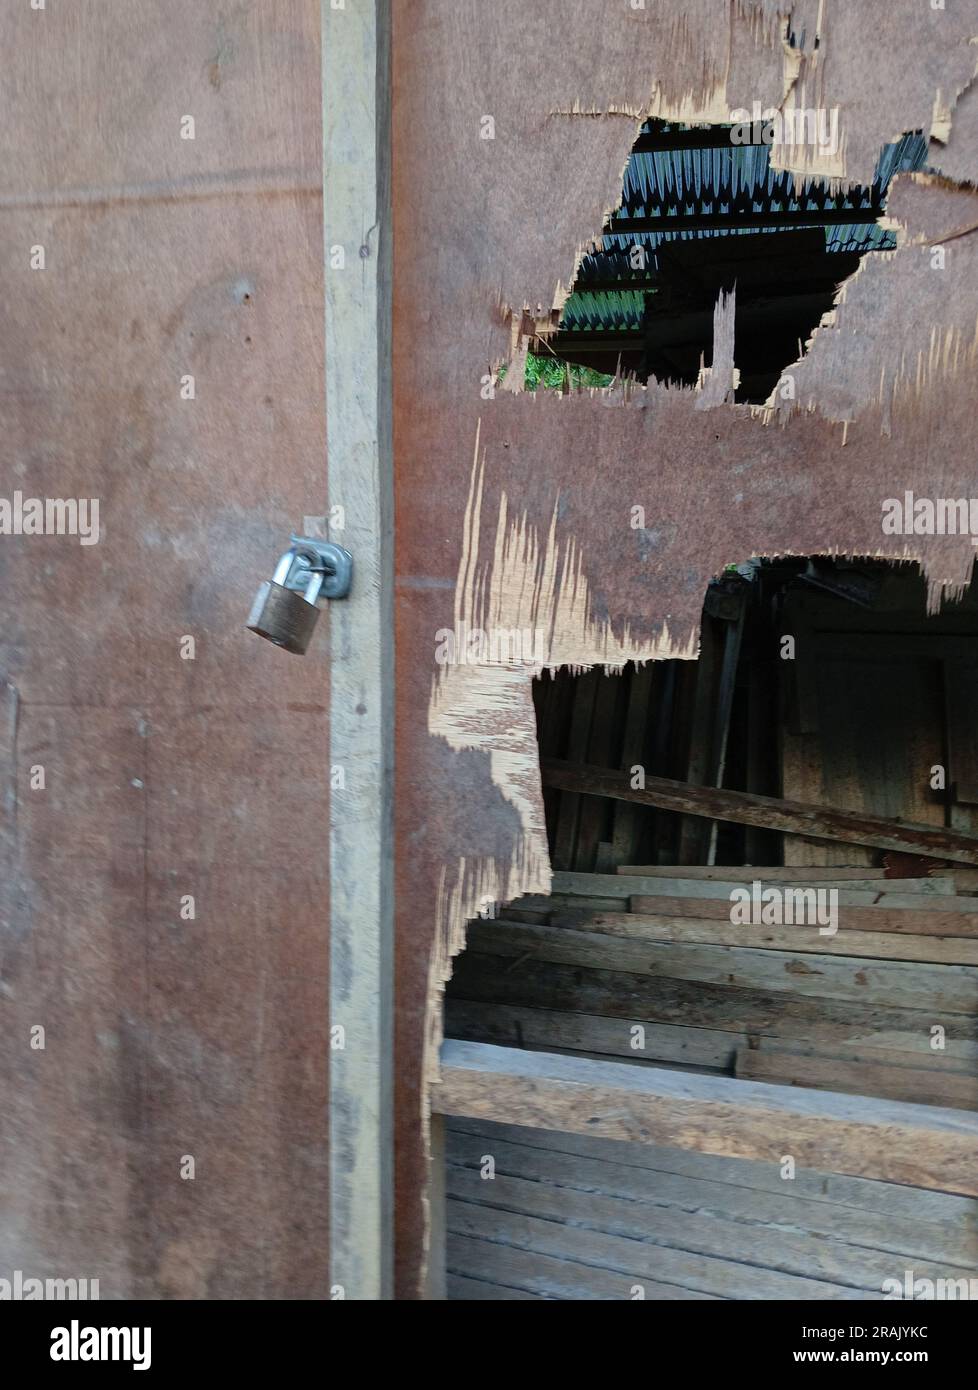 A small padlock attached to a door and wall made of plywood that has been damaged and has holes and shows the contents in the room. Stock Photo